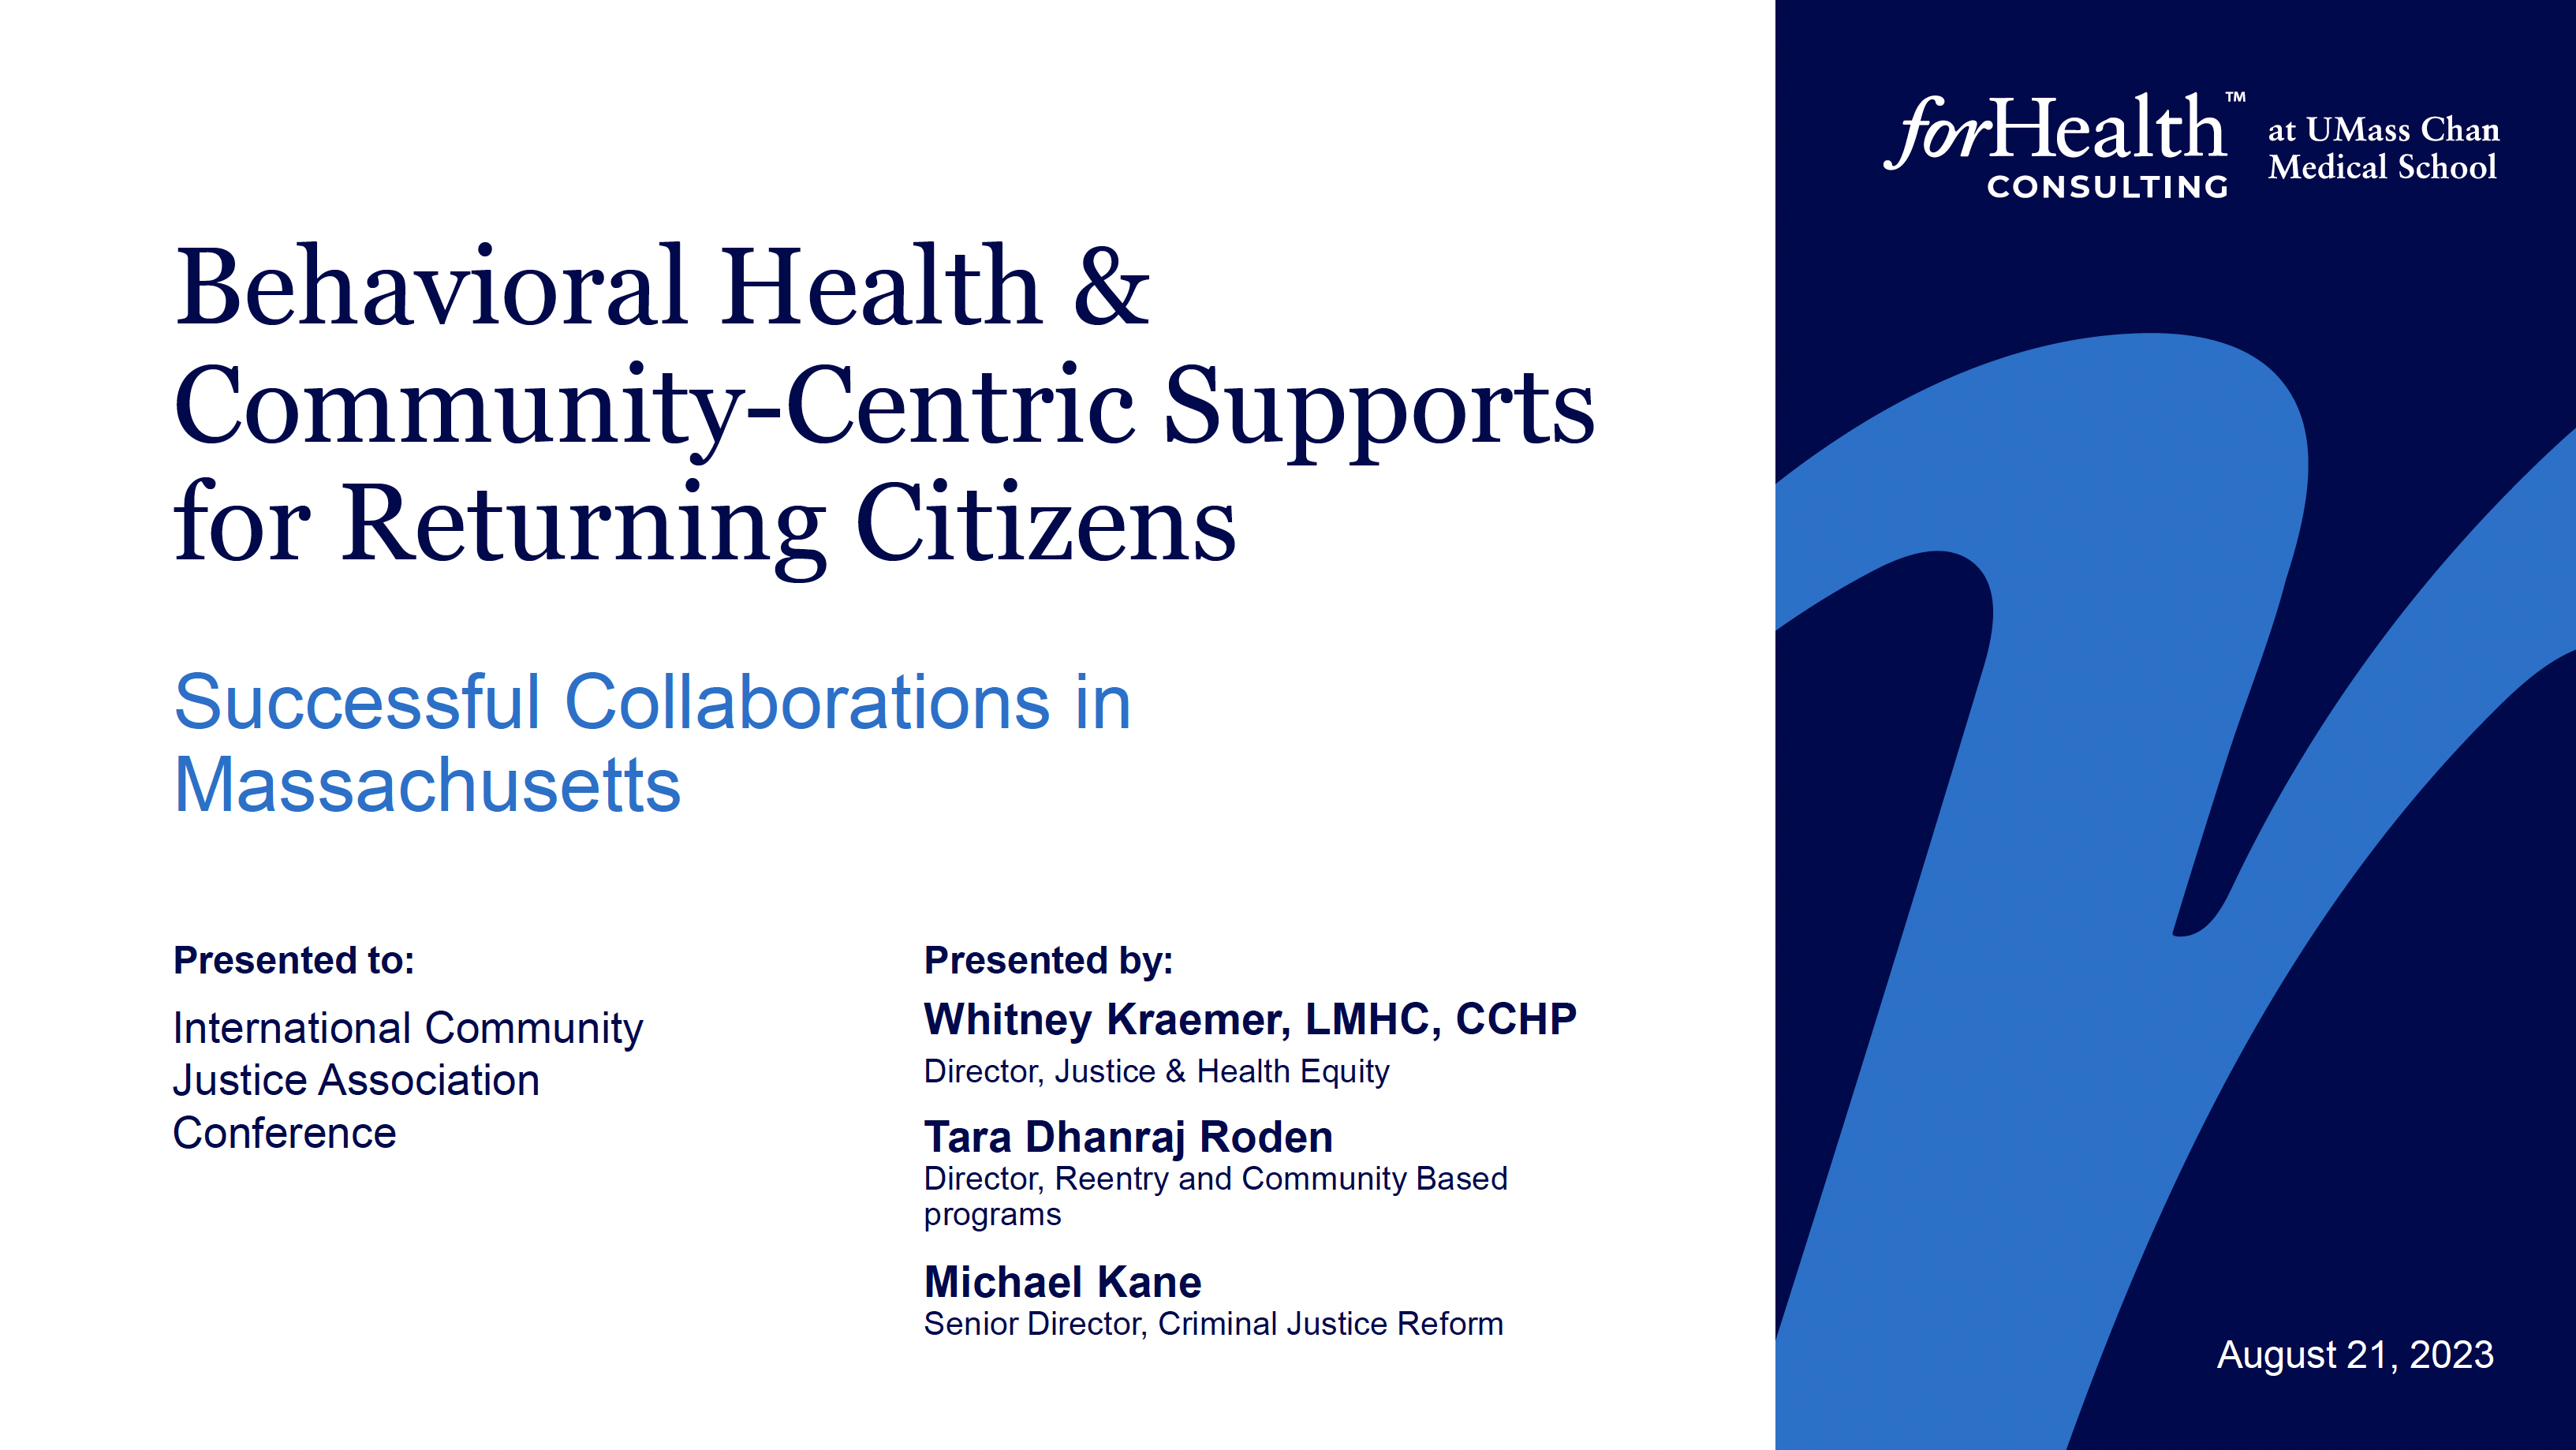 Behavioral Health & Community-Centric Supports for Returning Citizens